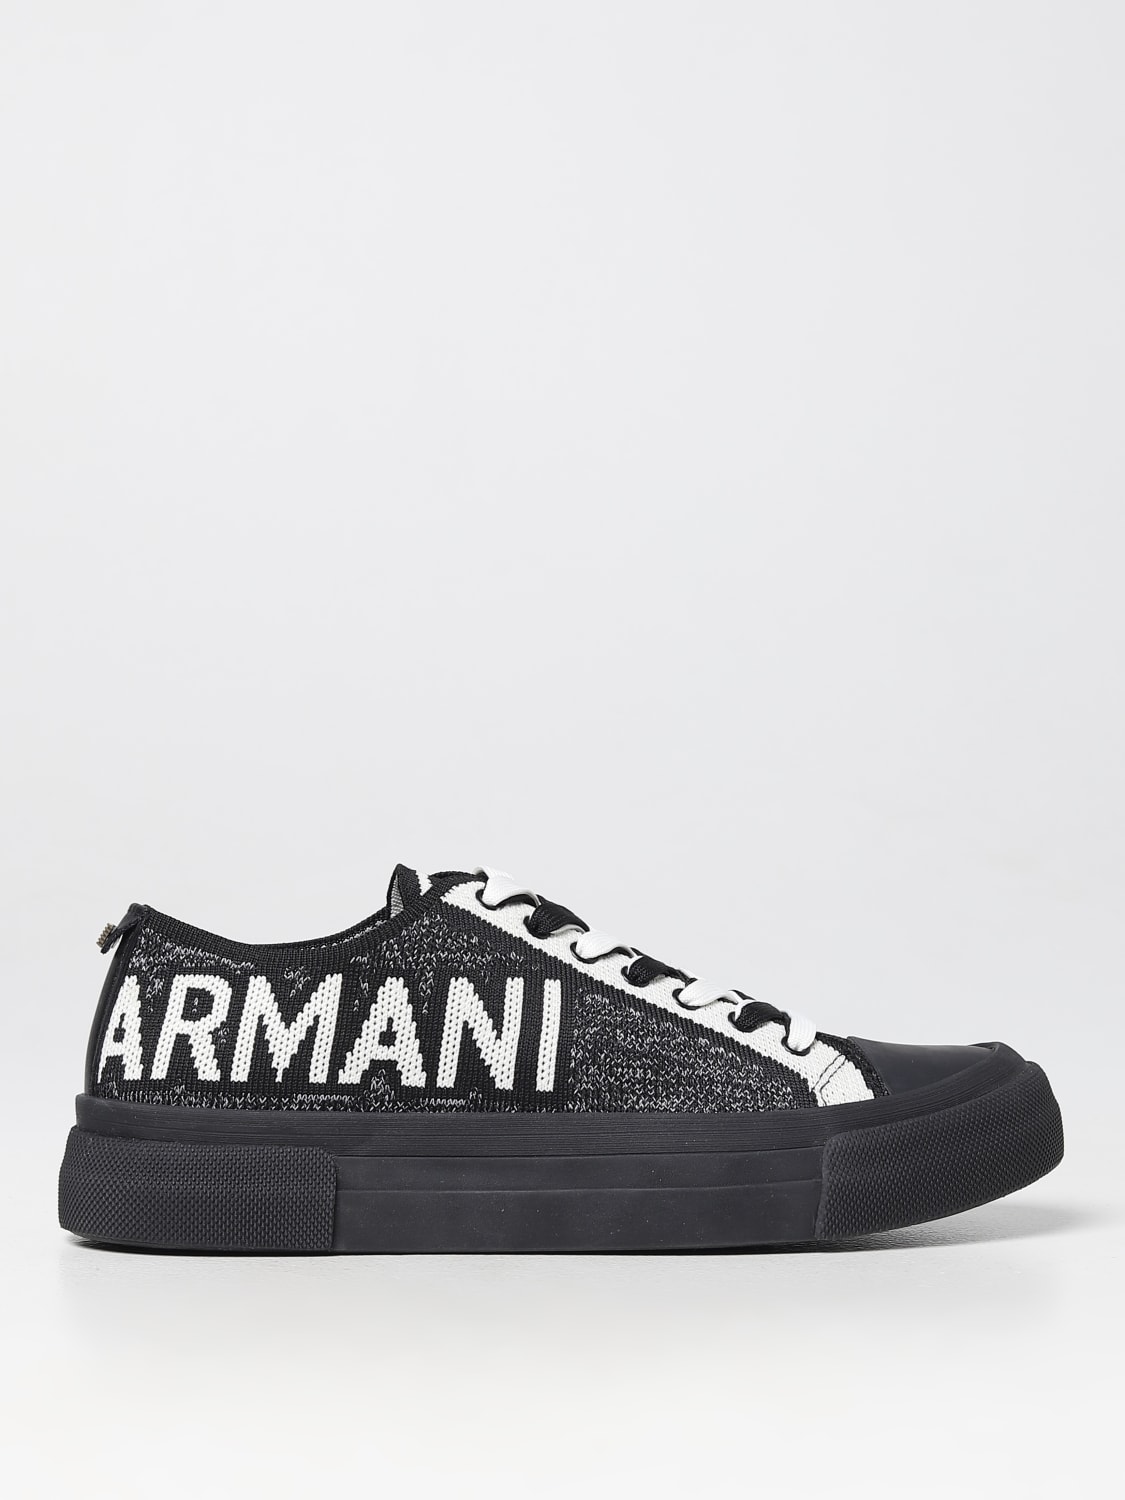 Tropisk bænk Forfatning EMPORIO ARMANI: sneakers in fabric with jacquard logo - Black | Emporio  Armani sneakers X4X618XN779 online at GIGLIO.COM